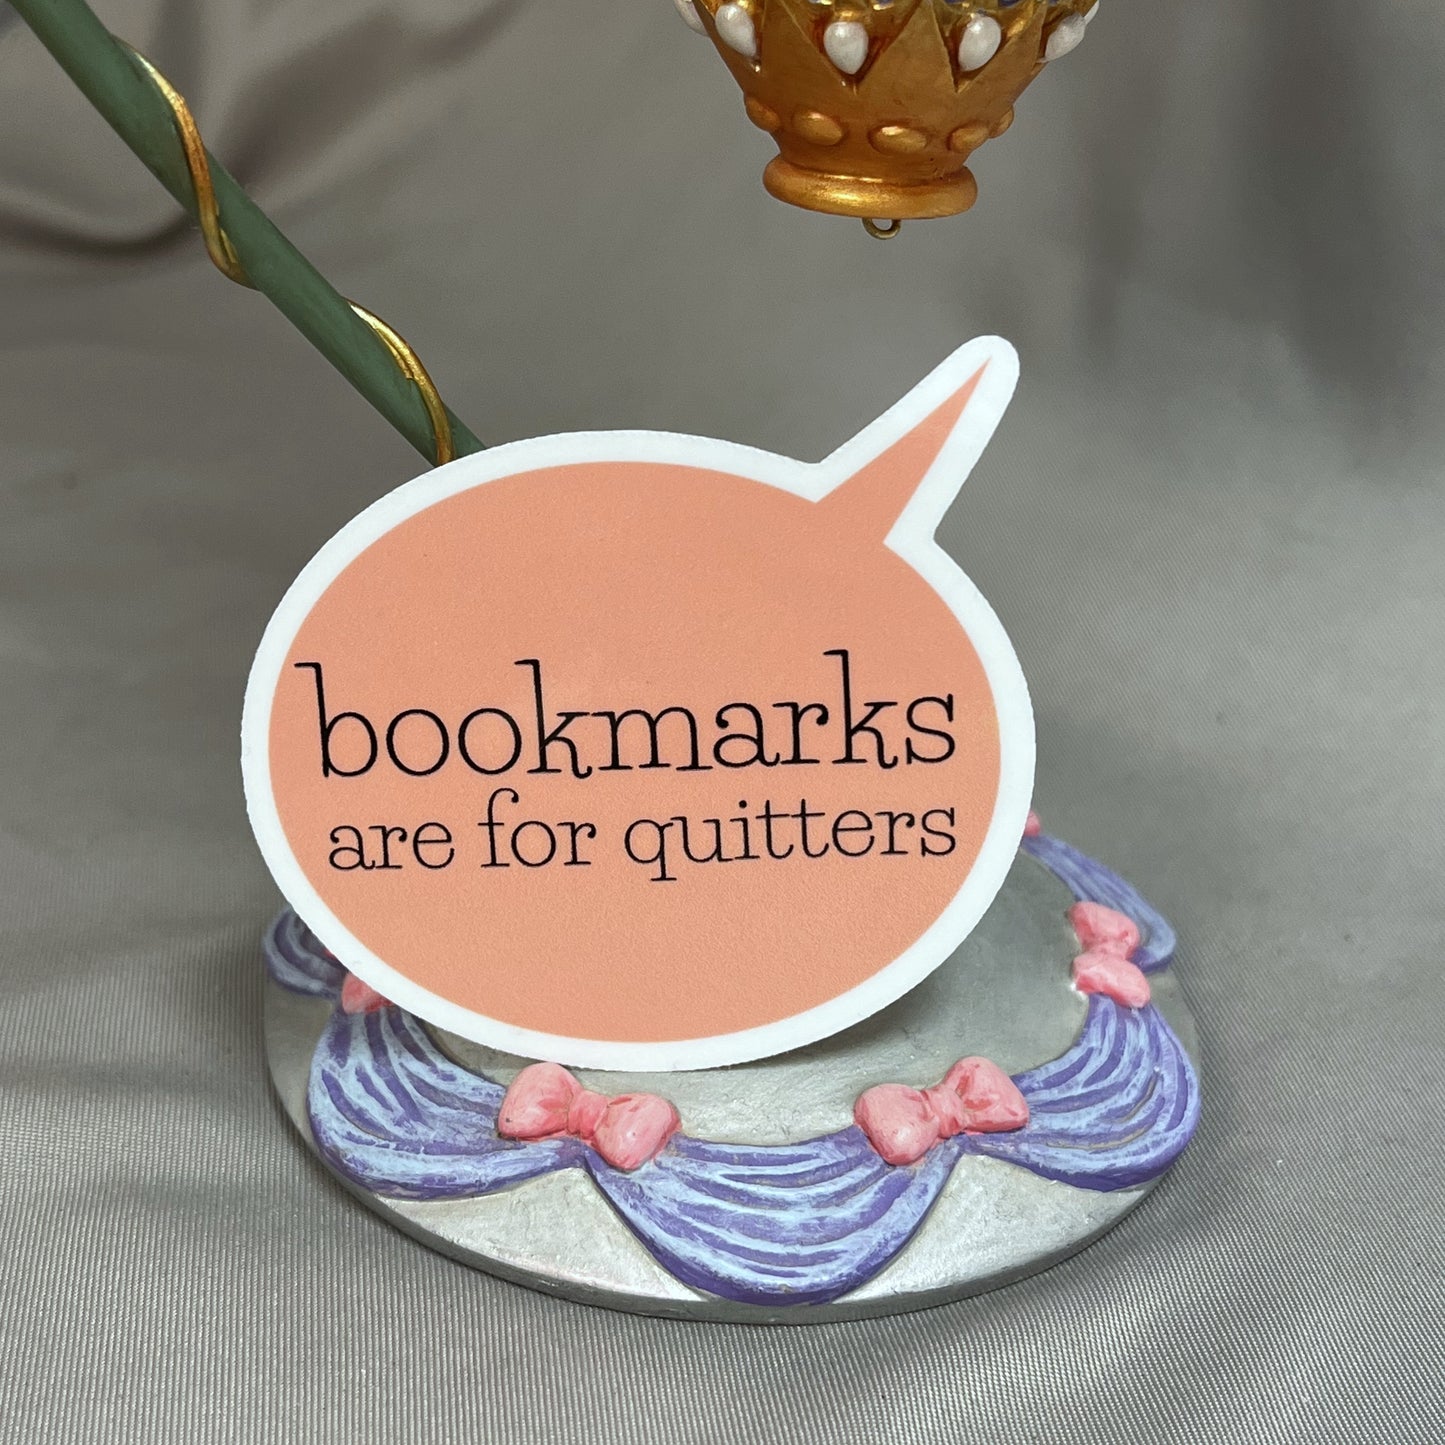 Bookmarks are for quitters - Vinyl Sticker